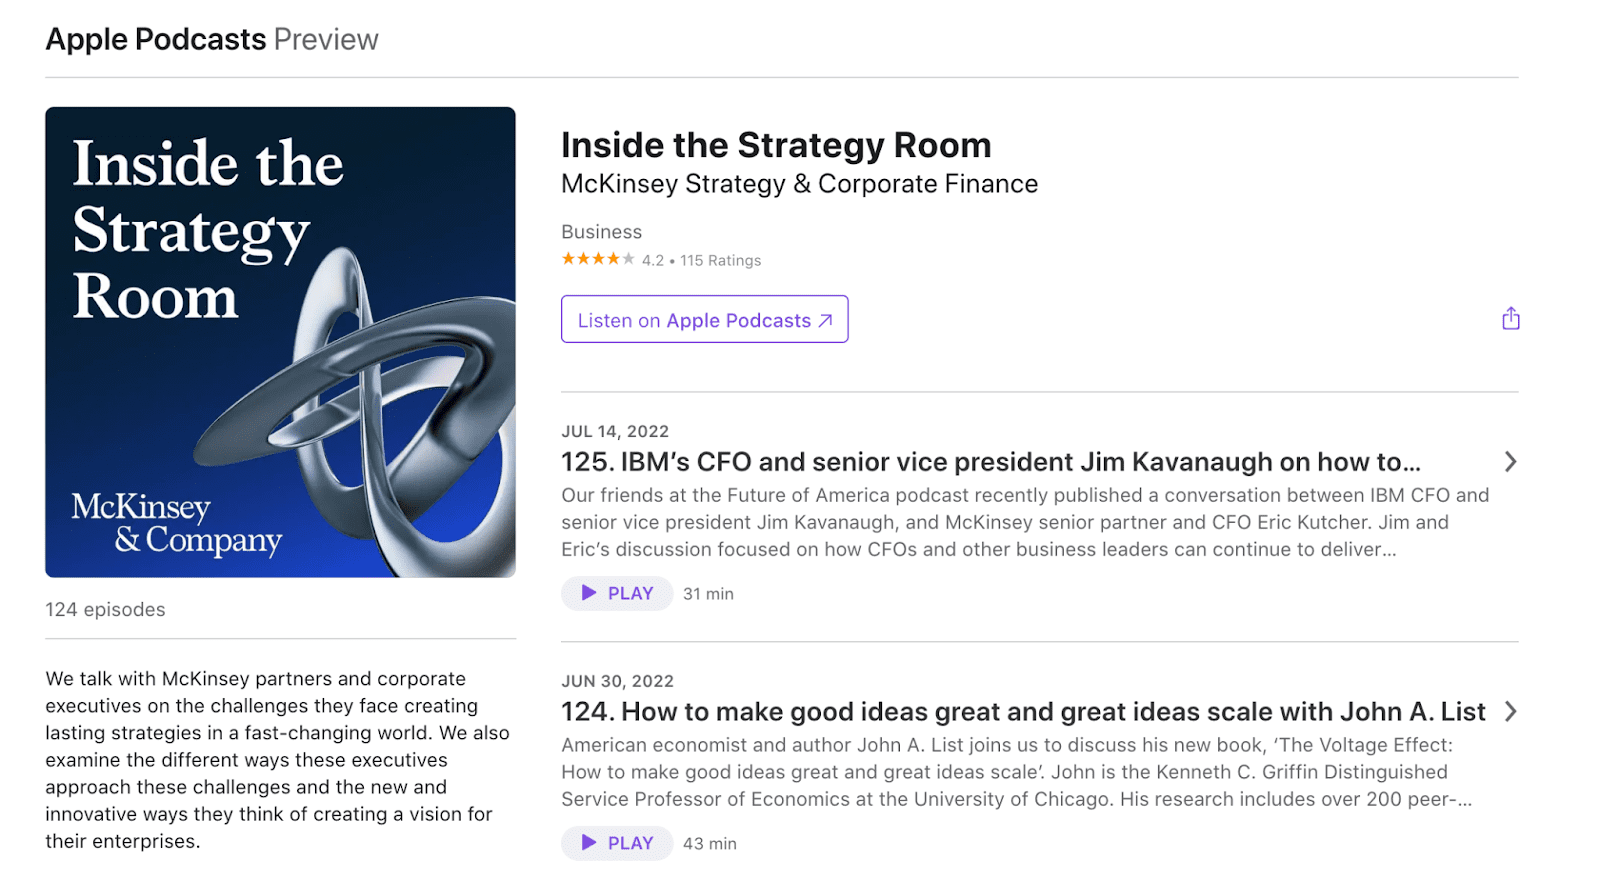 Inside The Strategy Room